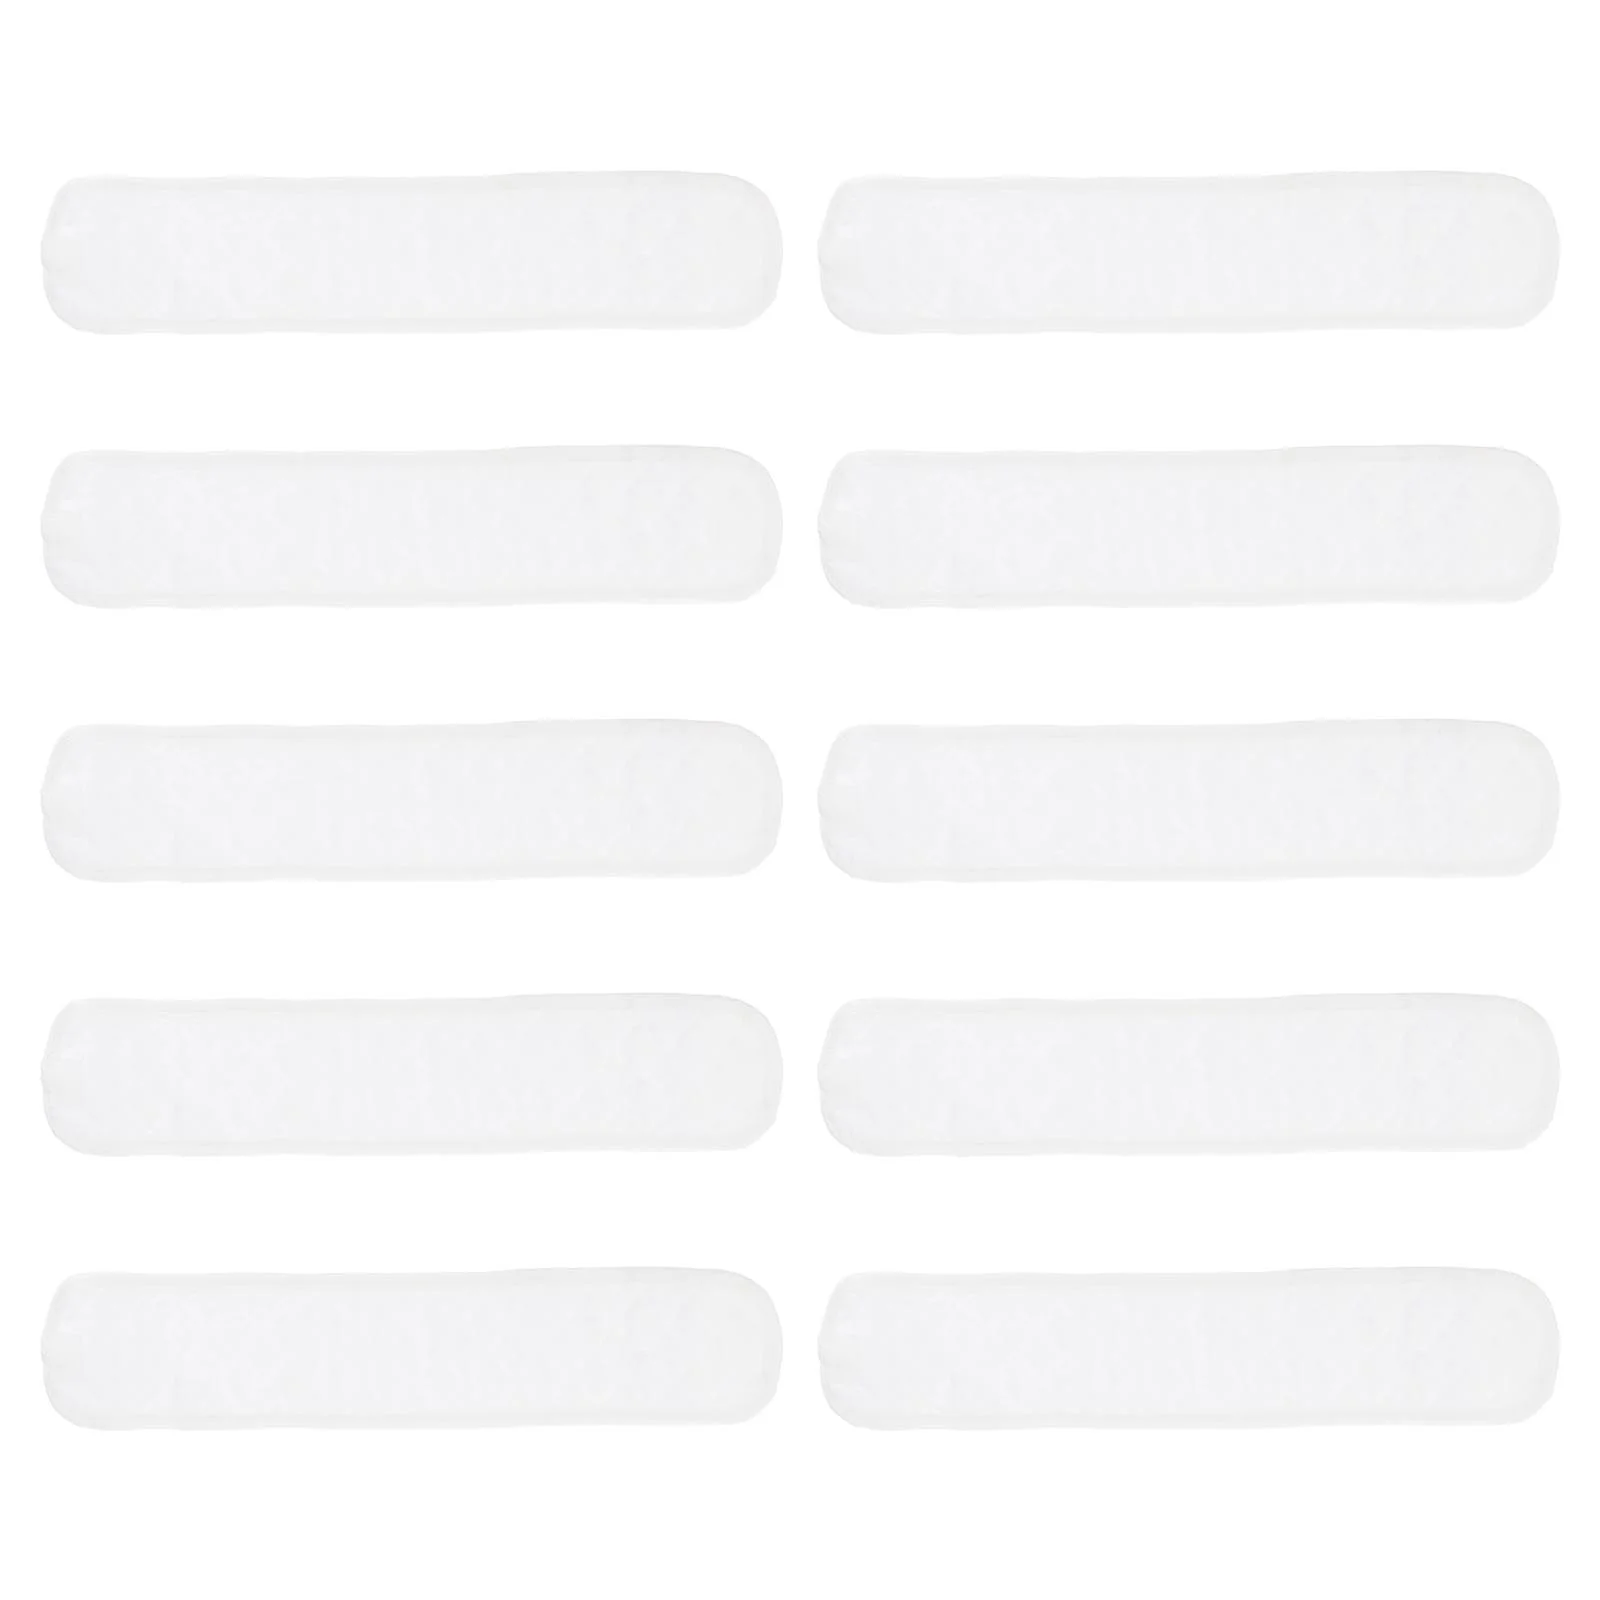 10Pcs infant navel belt Belly Band Cotton Umbilical Bands White Breathable Newborn Infant newborn belly band Bands infant belly 14g 316l surgical steel navel belly button rings butterfly barbell nombril ombligo navel ring bar piercing women belly jewelry